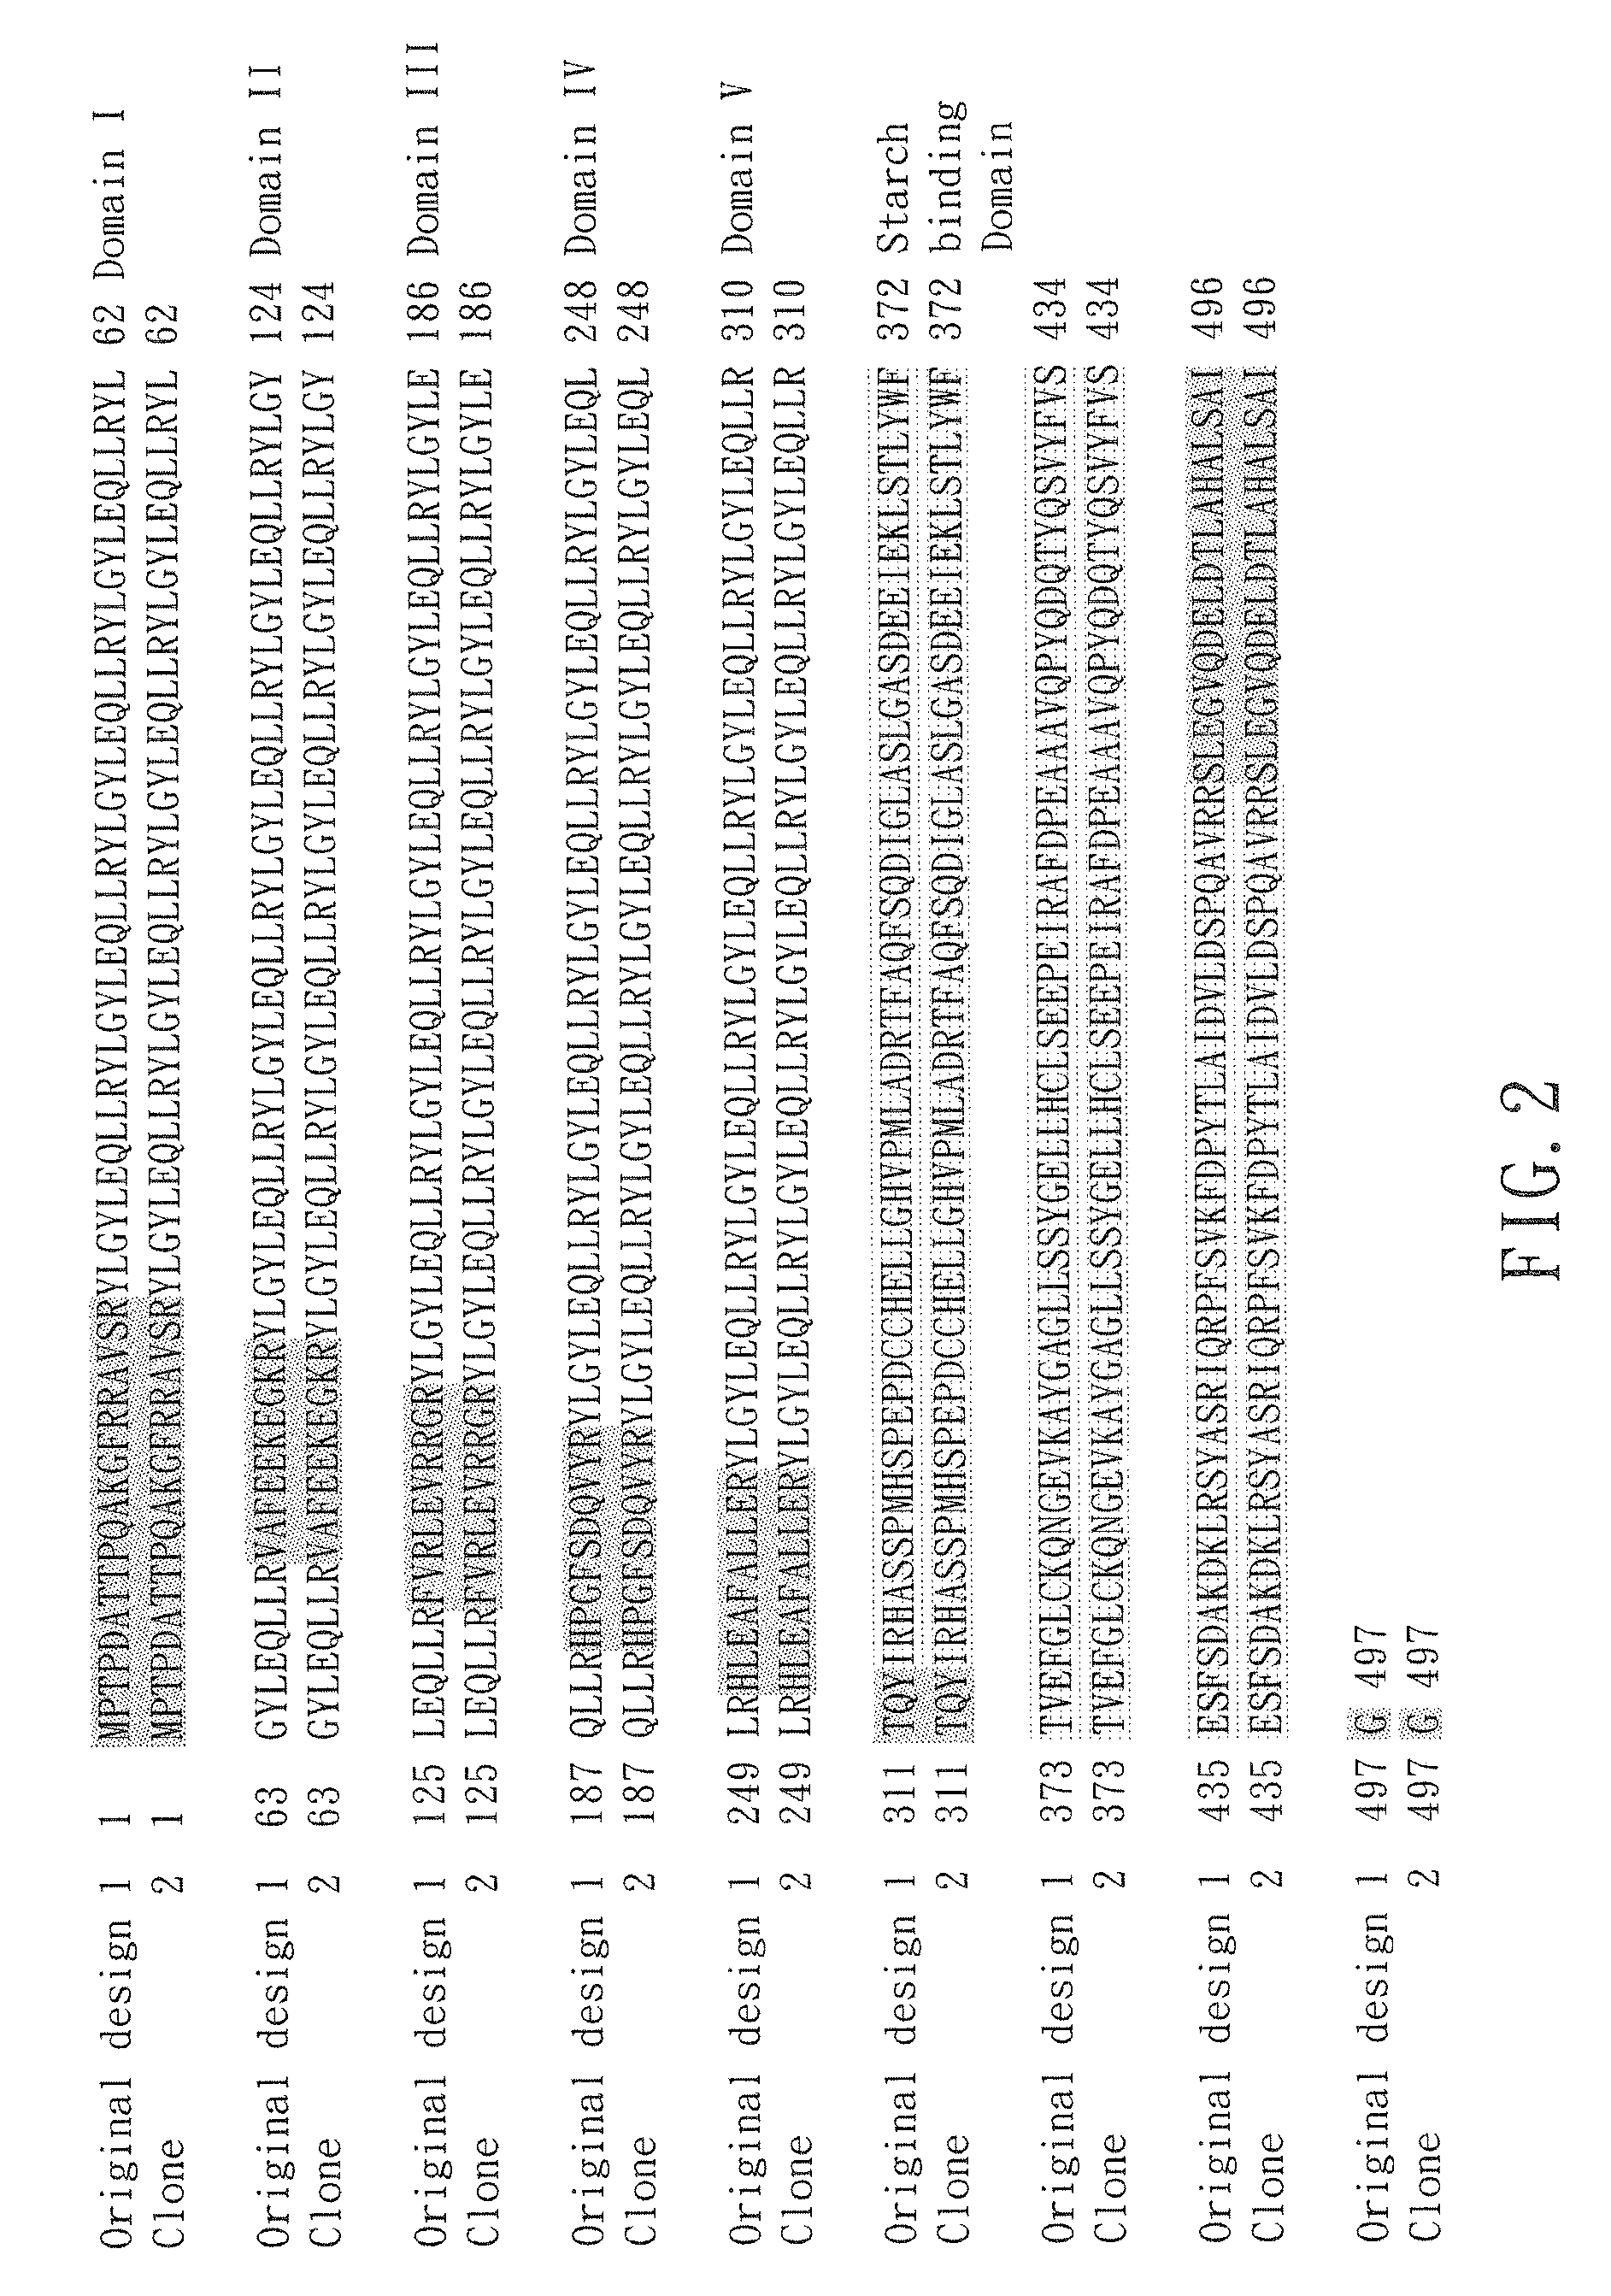 Recombinant protein, pharmaceutical composition containing the same, and method of biosynthesizing